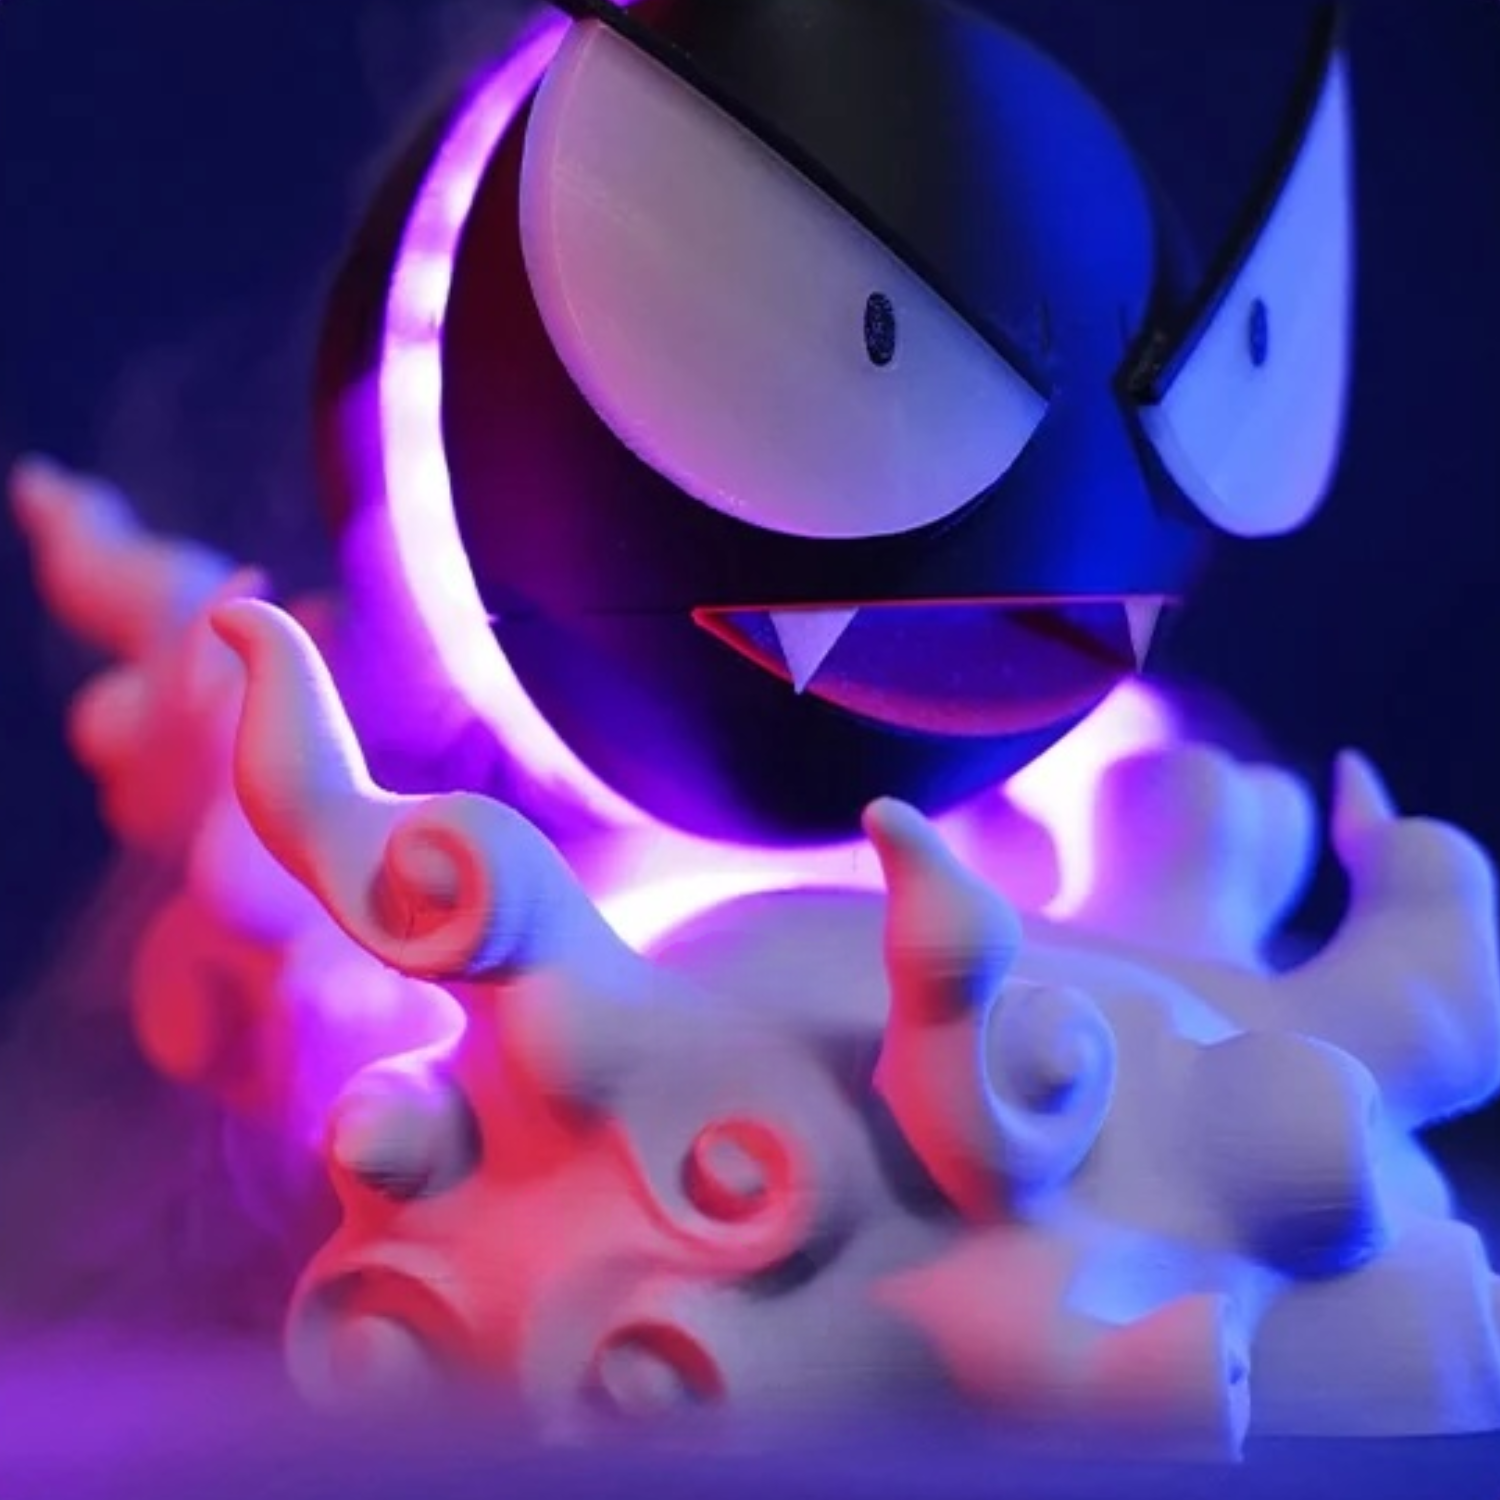 Gastly Humidifier 3.0 Evo Side - 3D printed luminous Pokémon humidifier with advanced mist emission, UV disinfection, and blue purple ambient night light glow.